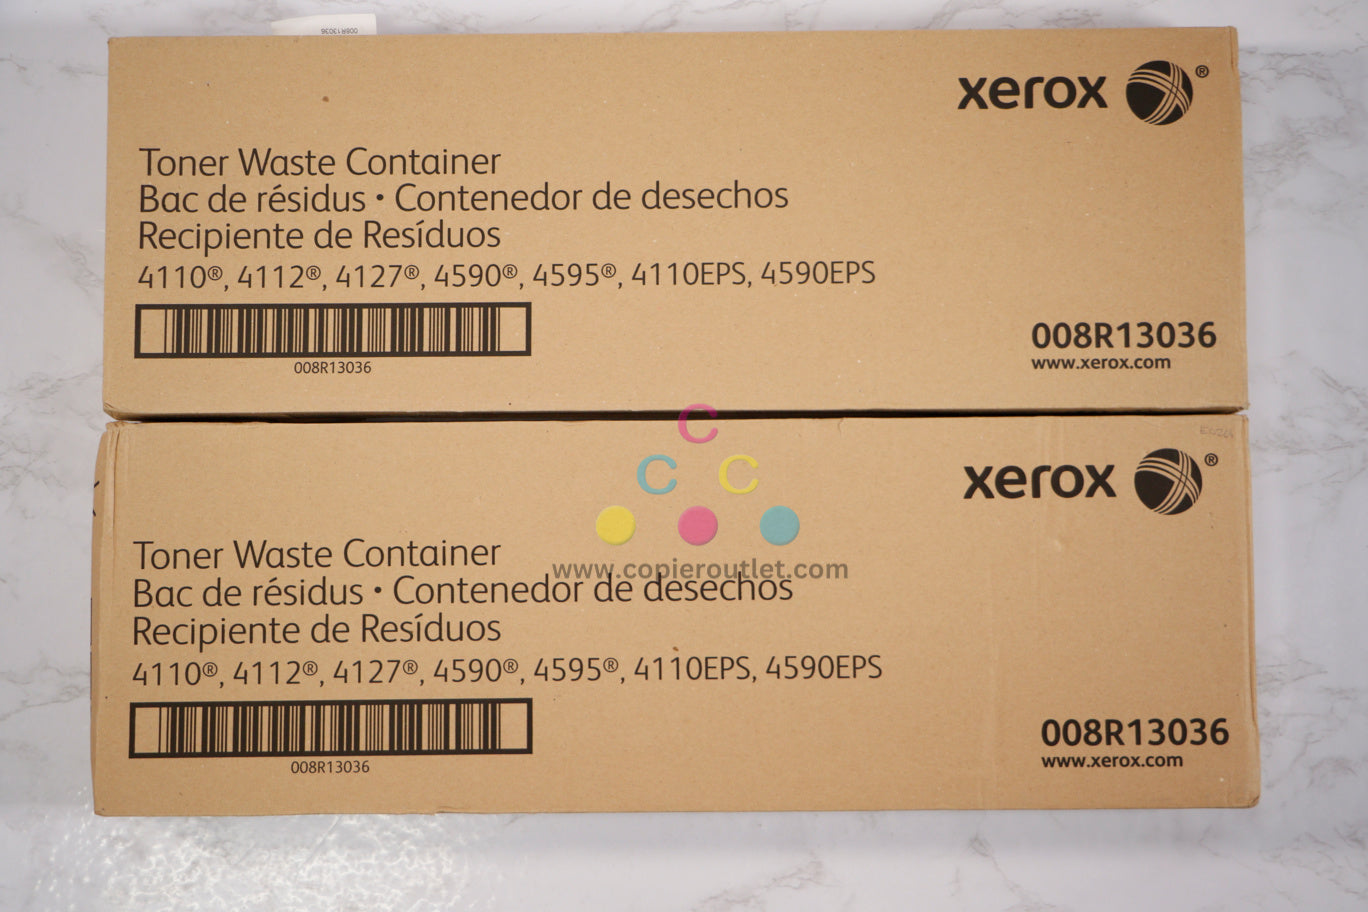 2 New OEM Xerox 4110, 4127, 4590, 4595, D110, D125 Waste Toner Containers 008R13036